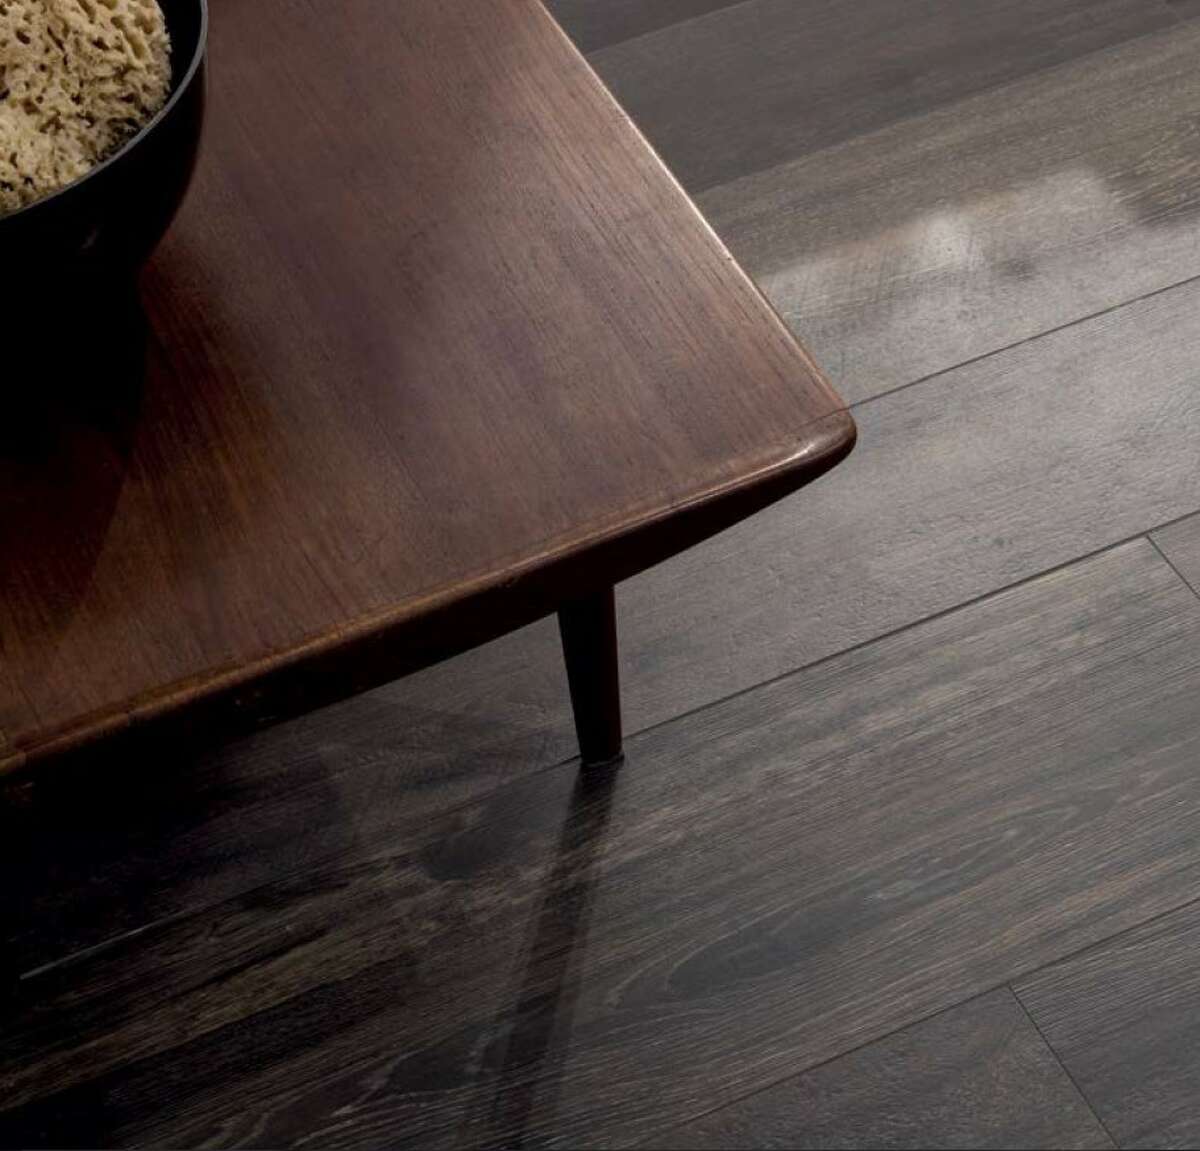 One of the hottest trends in flooring right now is porcelain tile that looks like wood. This room shows Casa Dolce Casa's Wooden Tile in brown.